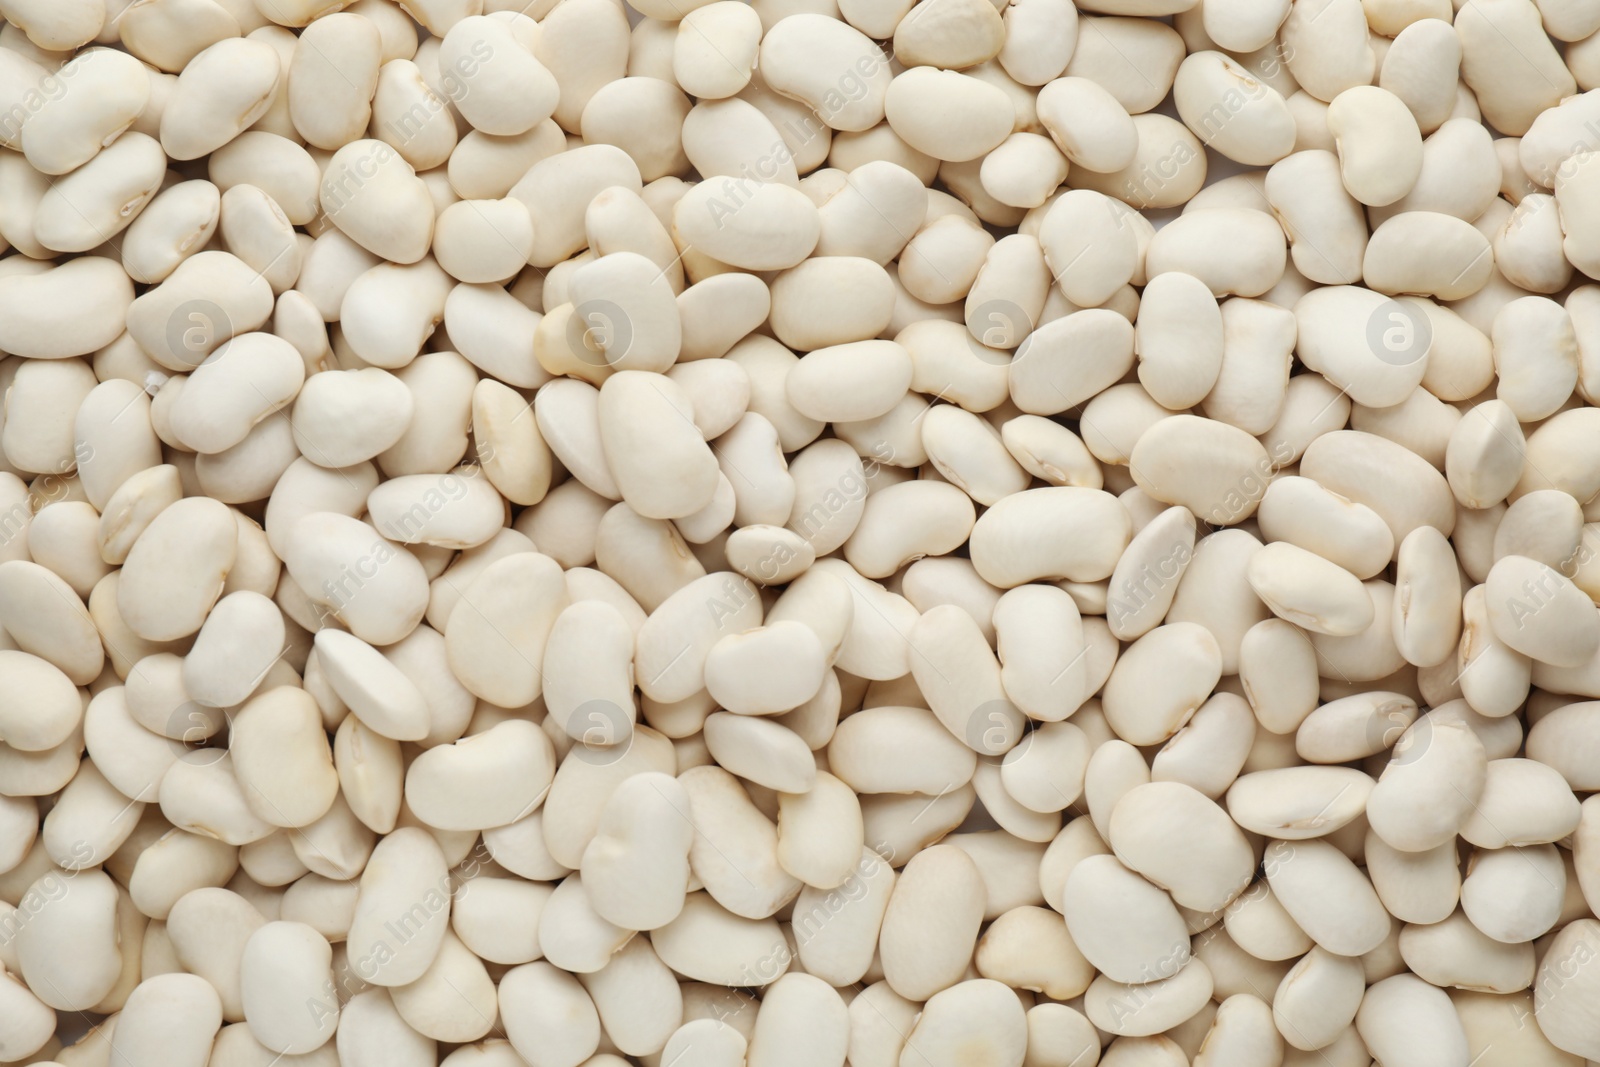 Photo of Pile of uncooked white beans as background, top view